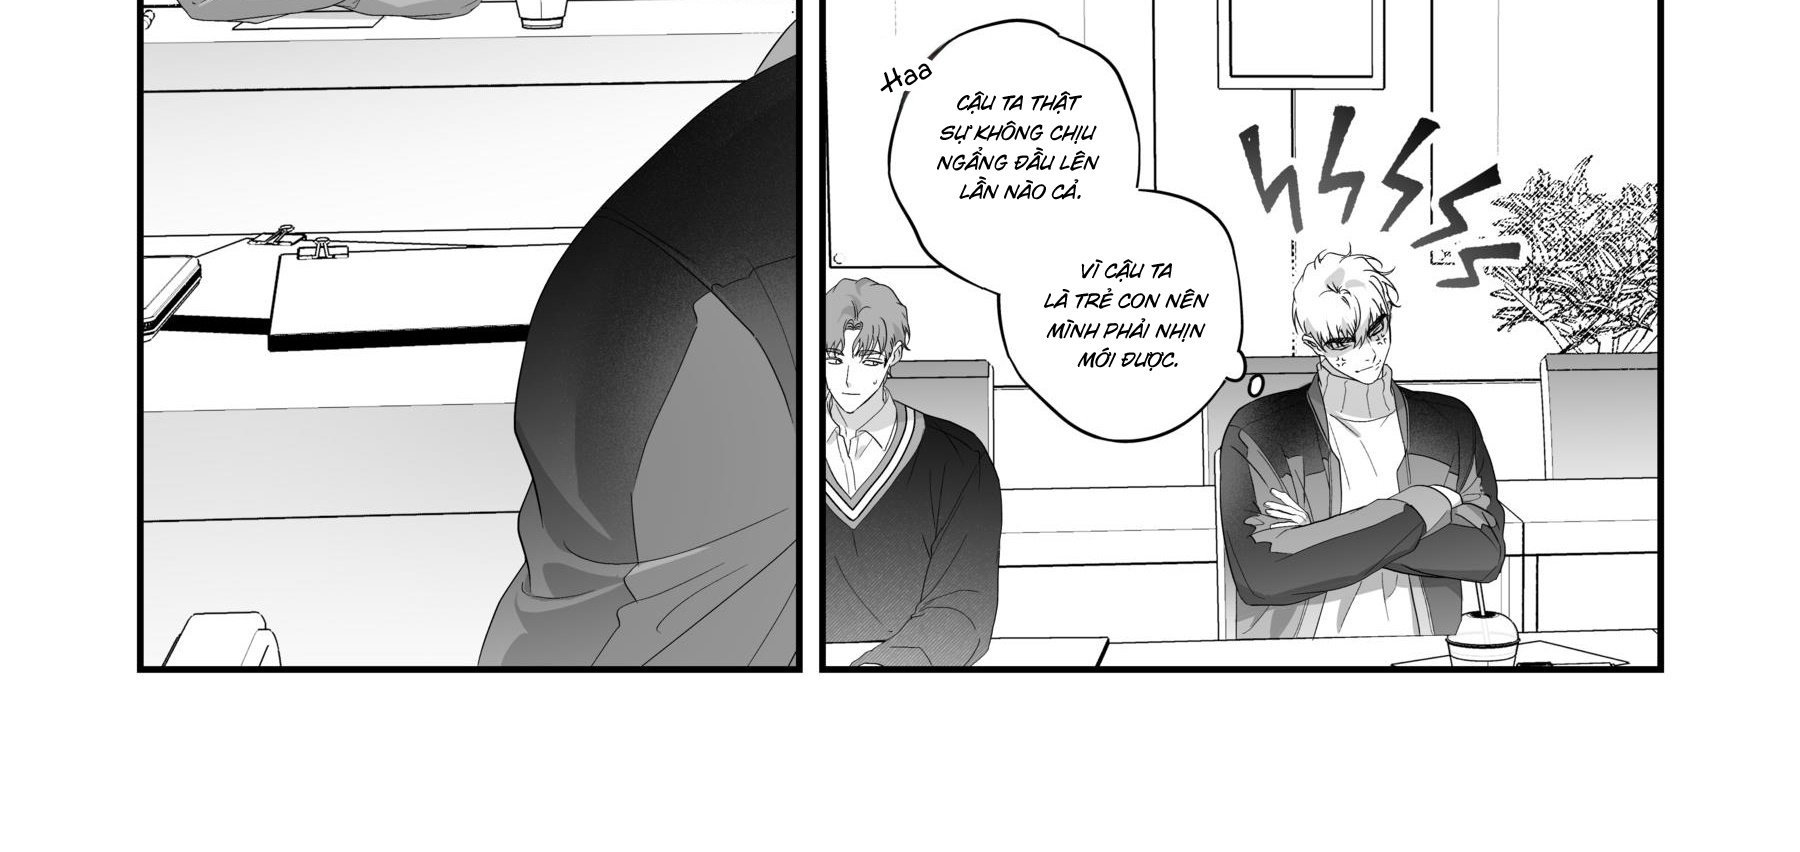 Re: Dream Chapter 2 - Trang 29